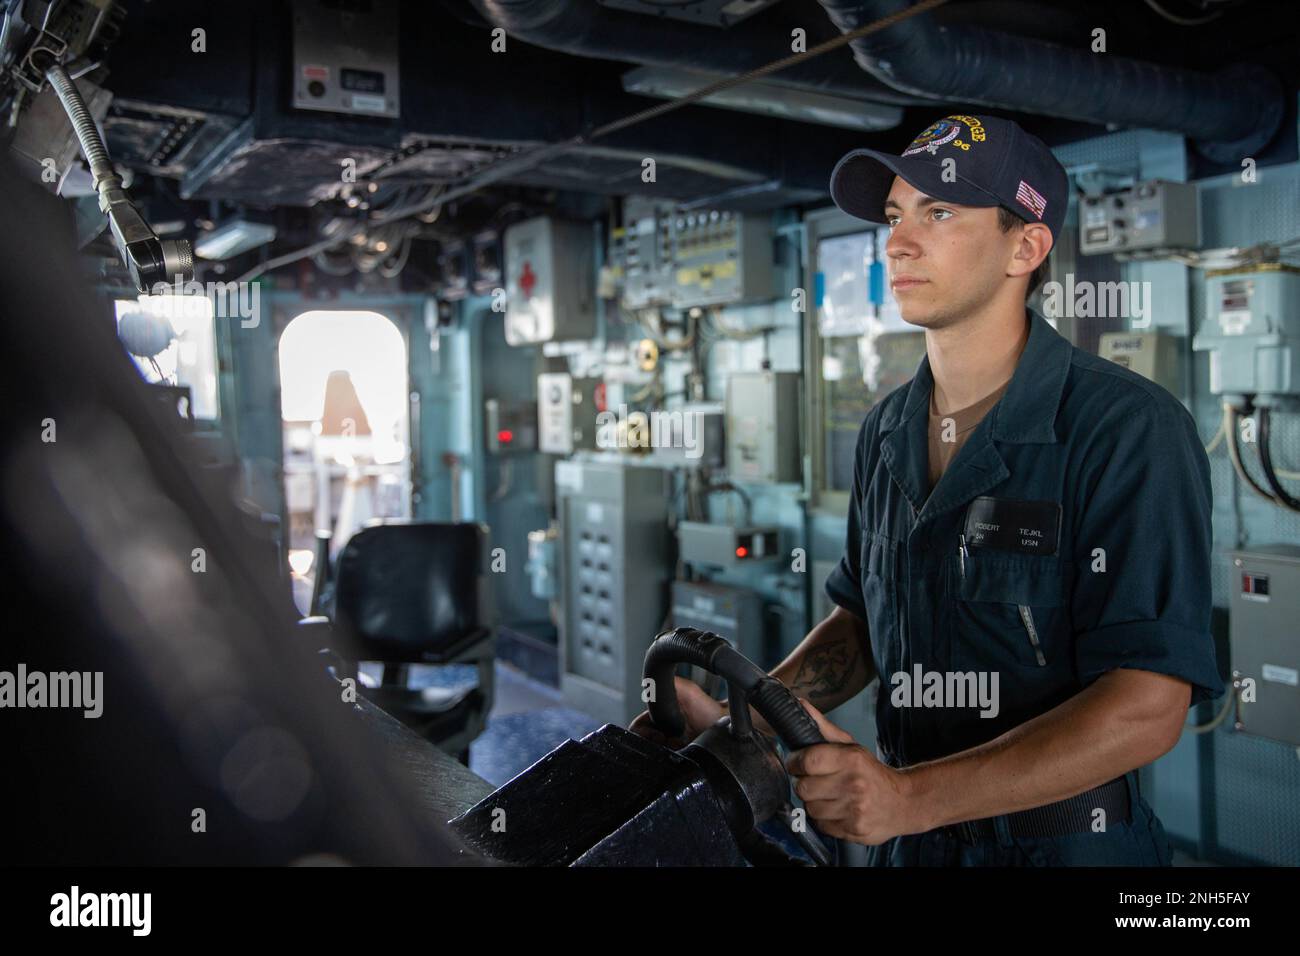 220717-N-QI593-2106 MEDITERRANEAN SEA (July 17, 2022) Seaman Robert Tejkl, from Mansfield, Texas, steers the Arleigh Burke-class guided missile destroyer USS Bainbridge (DDG 96) from the ship’s pilot house in the Mediterranean Sea, July 17, 2022. Bainbridge is on a scheduled deployment in the U.S. Naval Forces Europe area of operations, employed by U.S. Sixth Fleet to defend U.S., allied and partner interests. Stock Photo